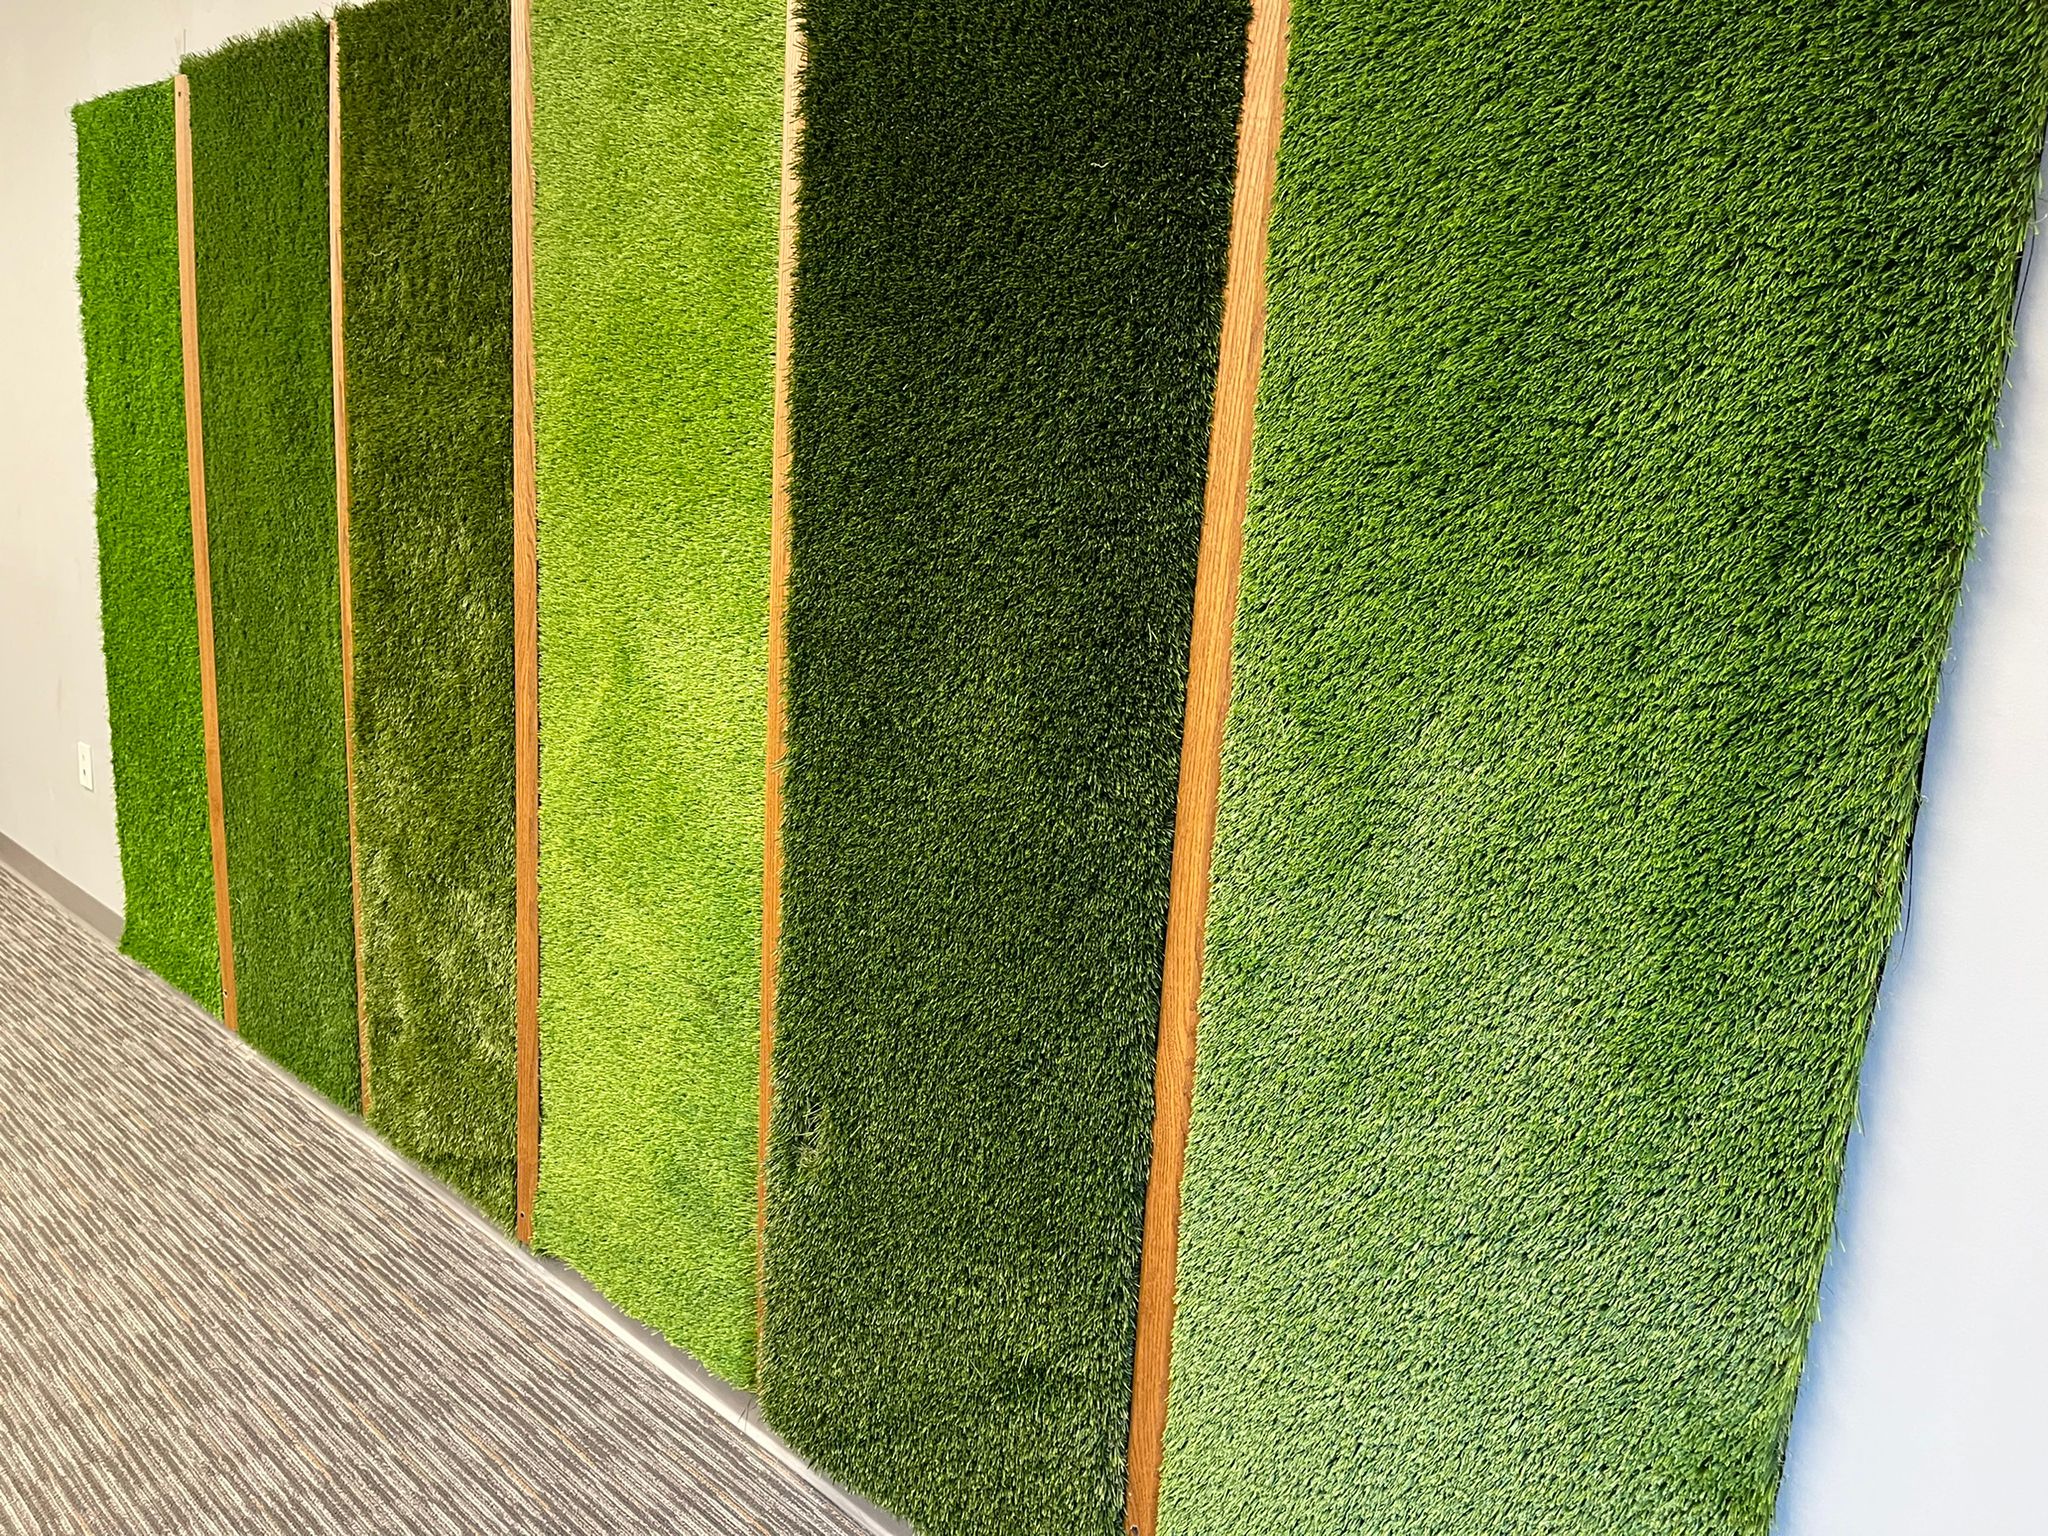 How to Pick the Right Color for Your Artificial Turf